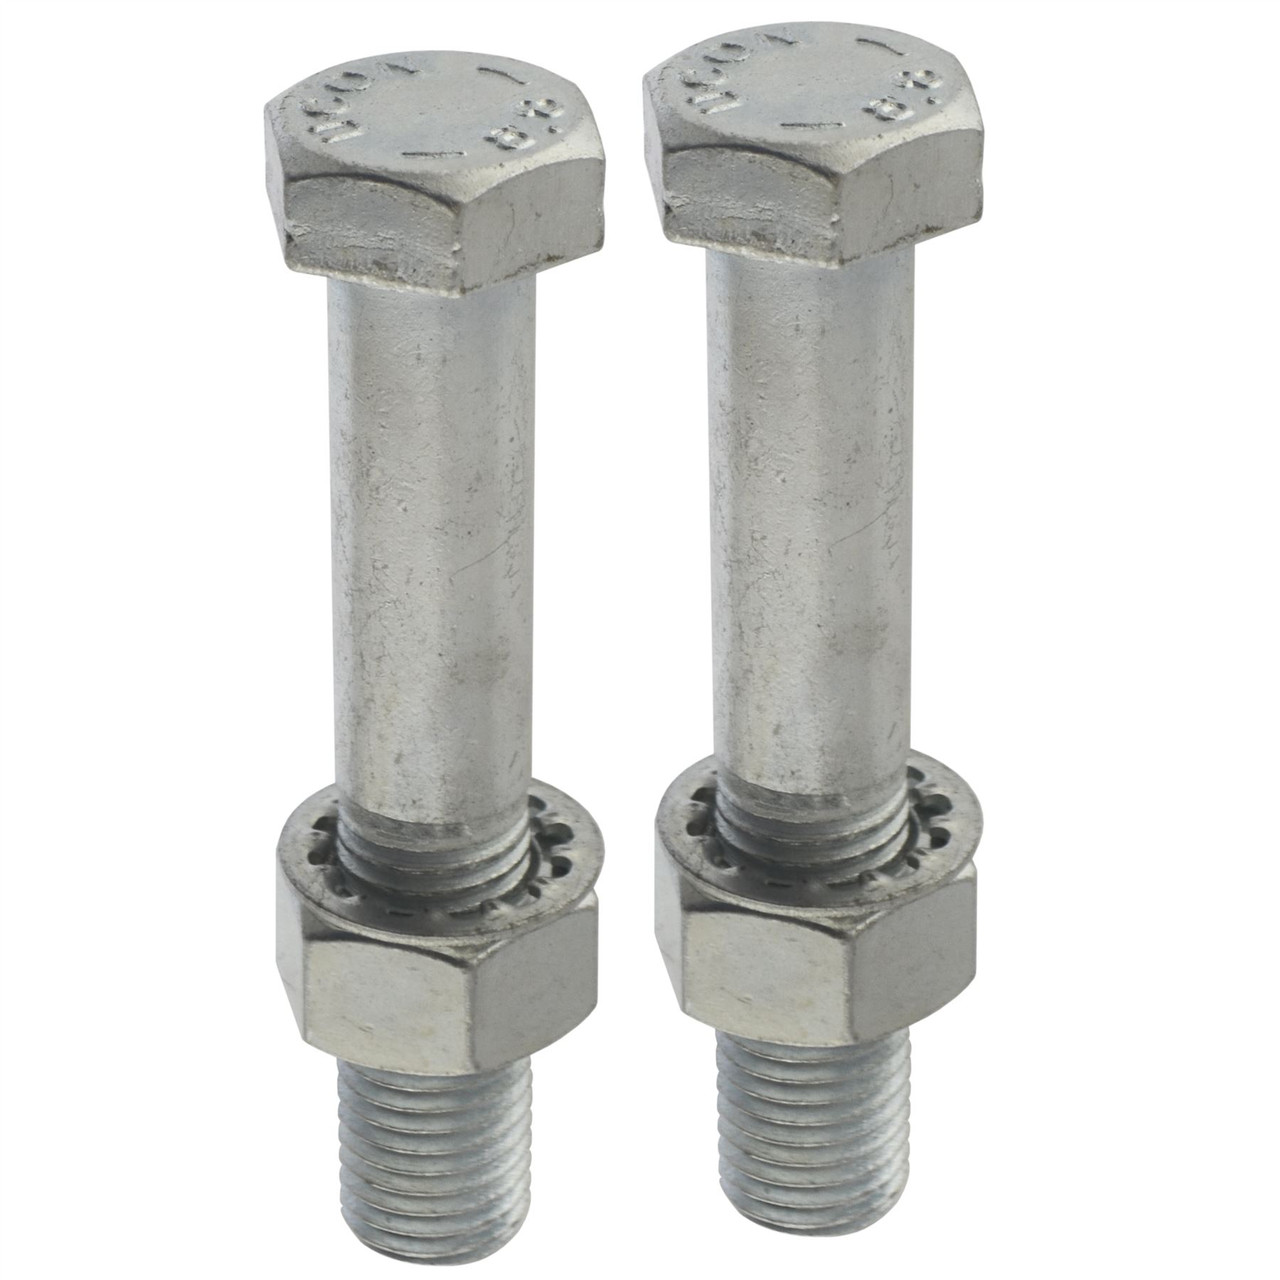 PAIR Tow Bar / Tow Ball Bolts 90mm Long with Nuts & Washers HIGH TENSILE